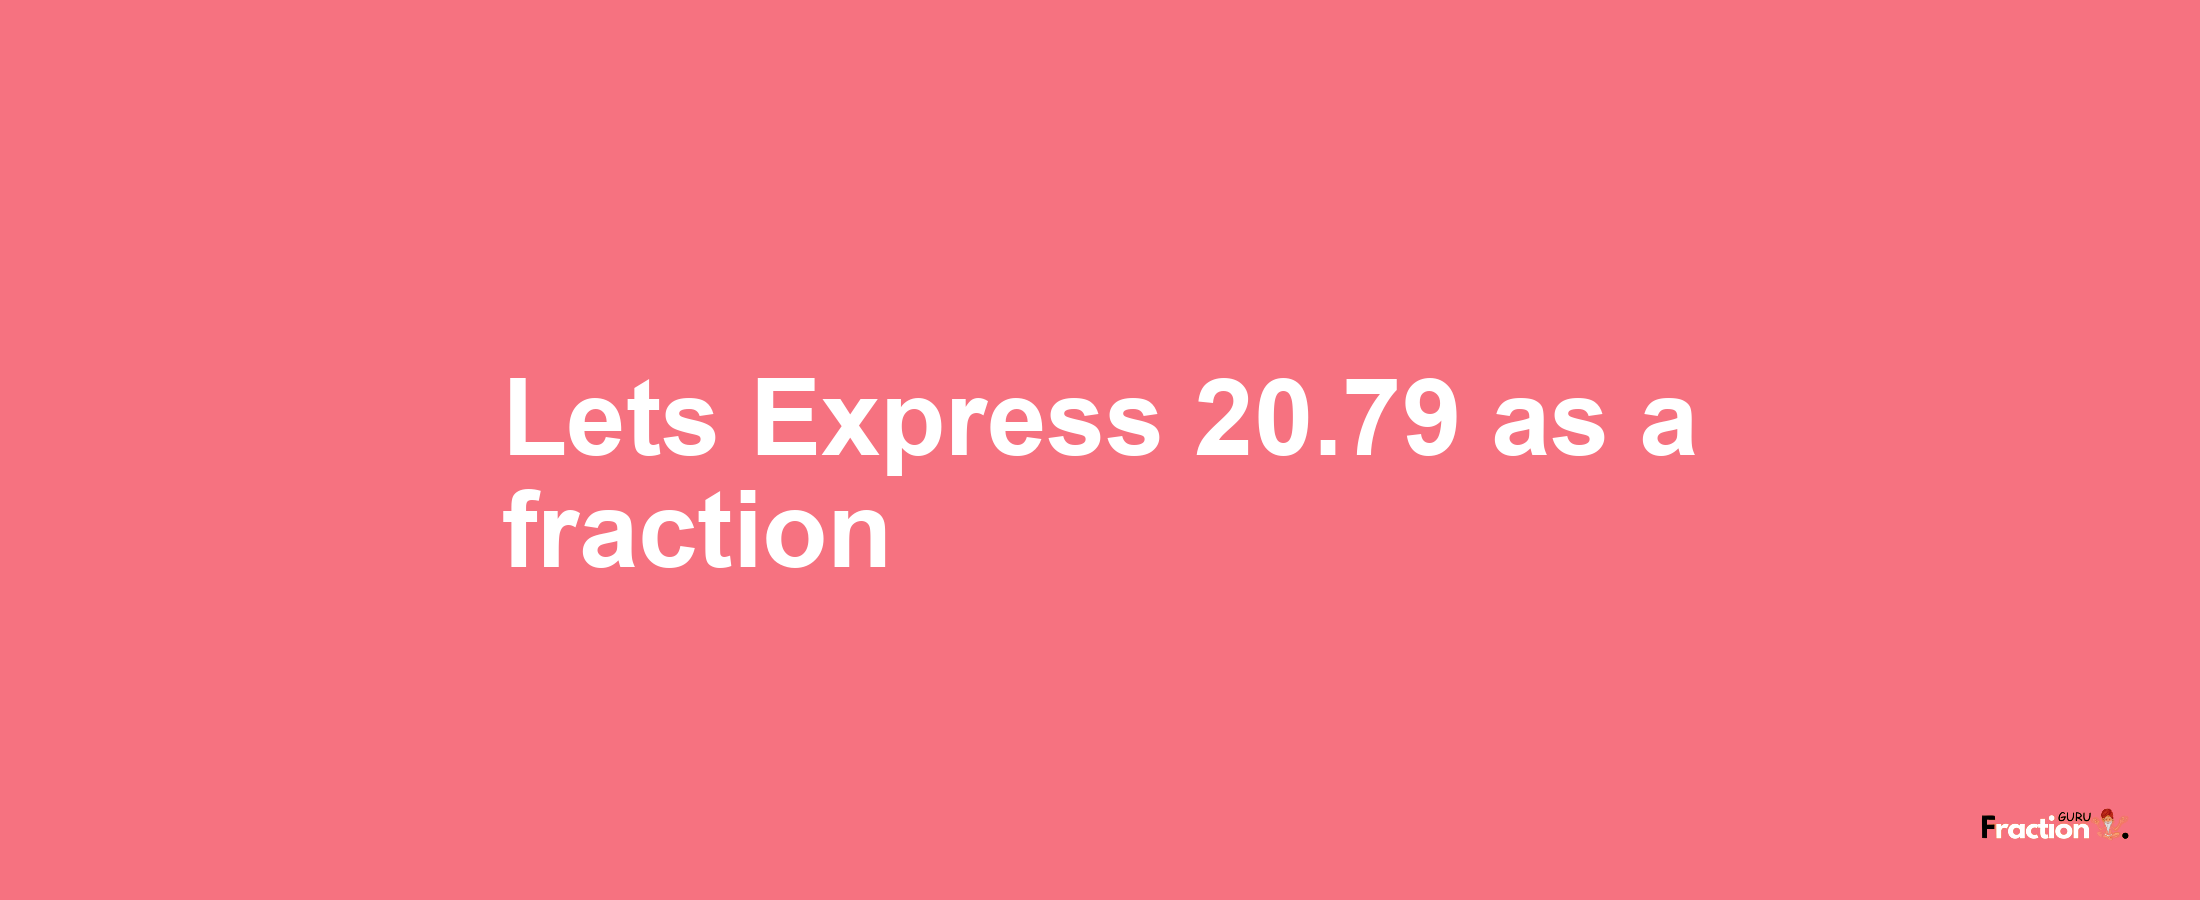 Lets Express 20.79 as afraction